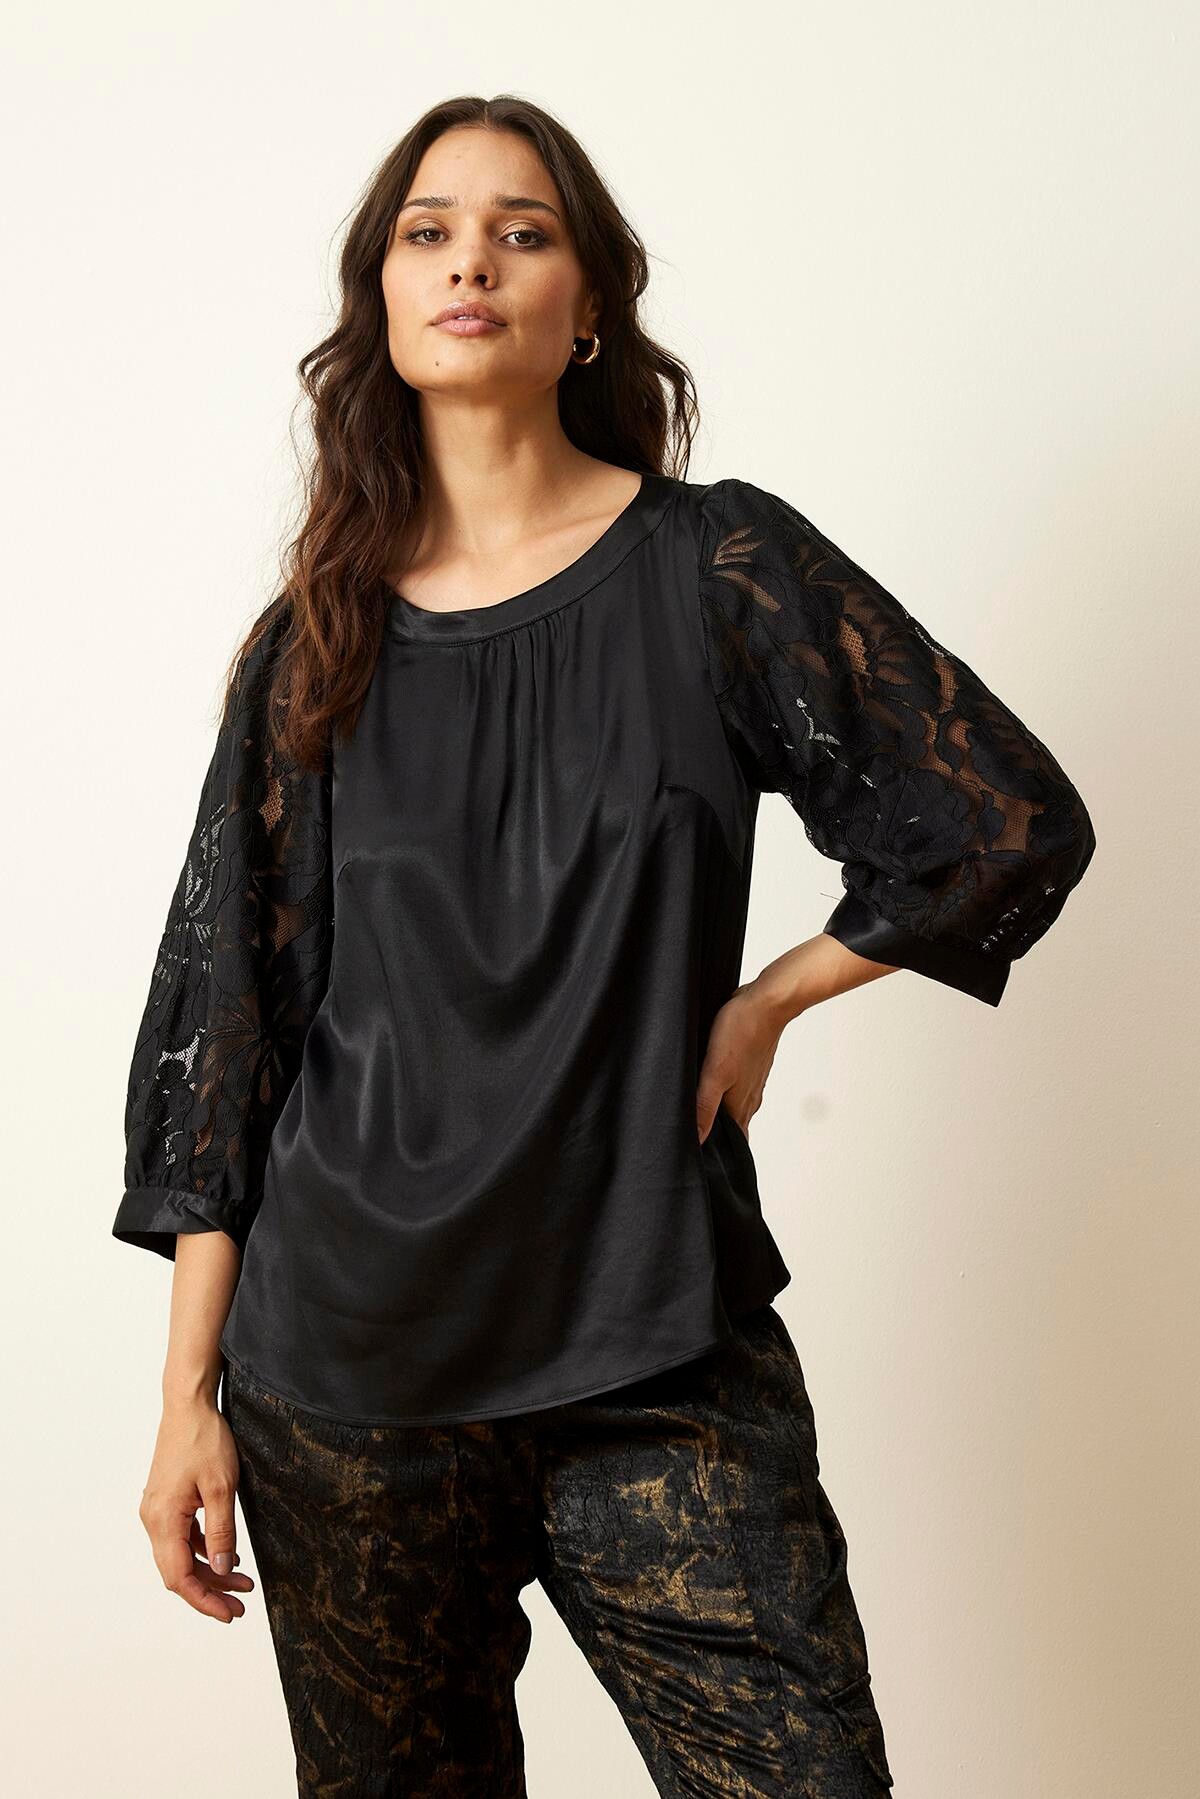  Blouses for Women Down with Pocket Tops Under $10 Lightening  desls of The Day Women Tops and Blouses Sexy Liquidation pallets of Bulk  Sexy Shirt Womens Clothes Under 10 Dollars B-Blue 